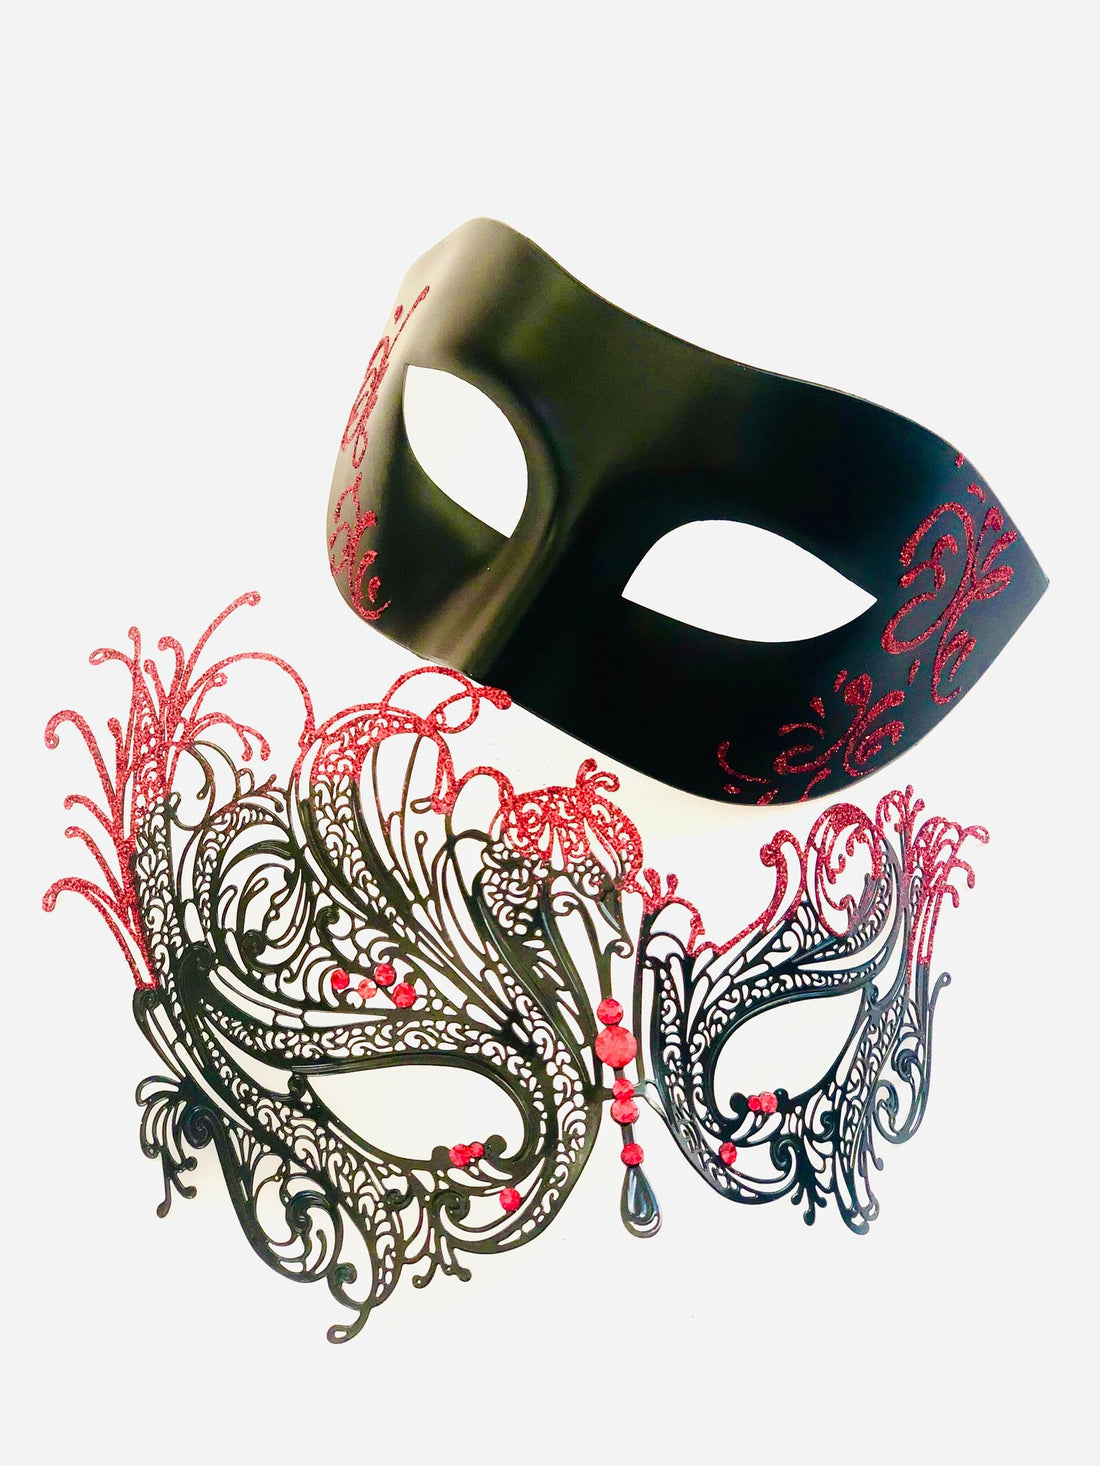 Metal mask in black with red glitter and ruby stones. Black men&